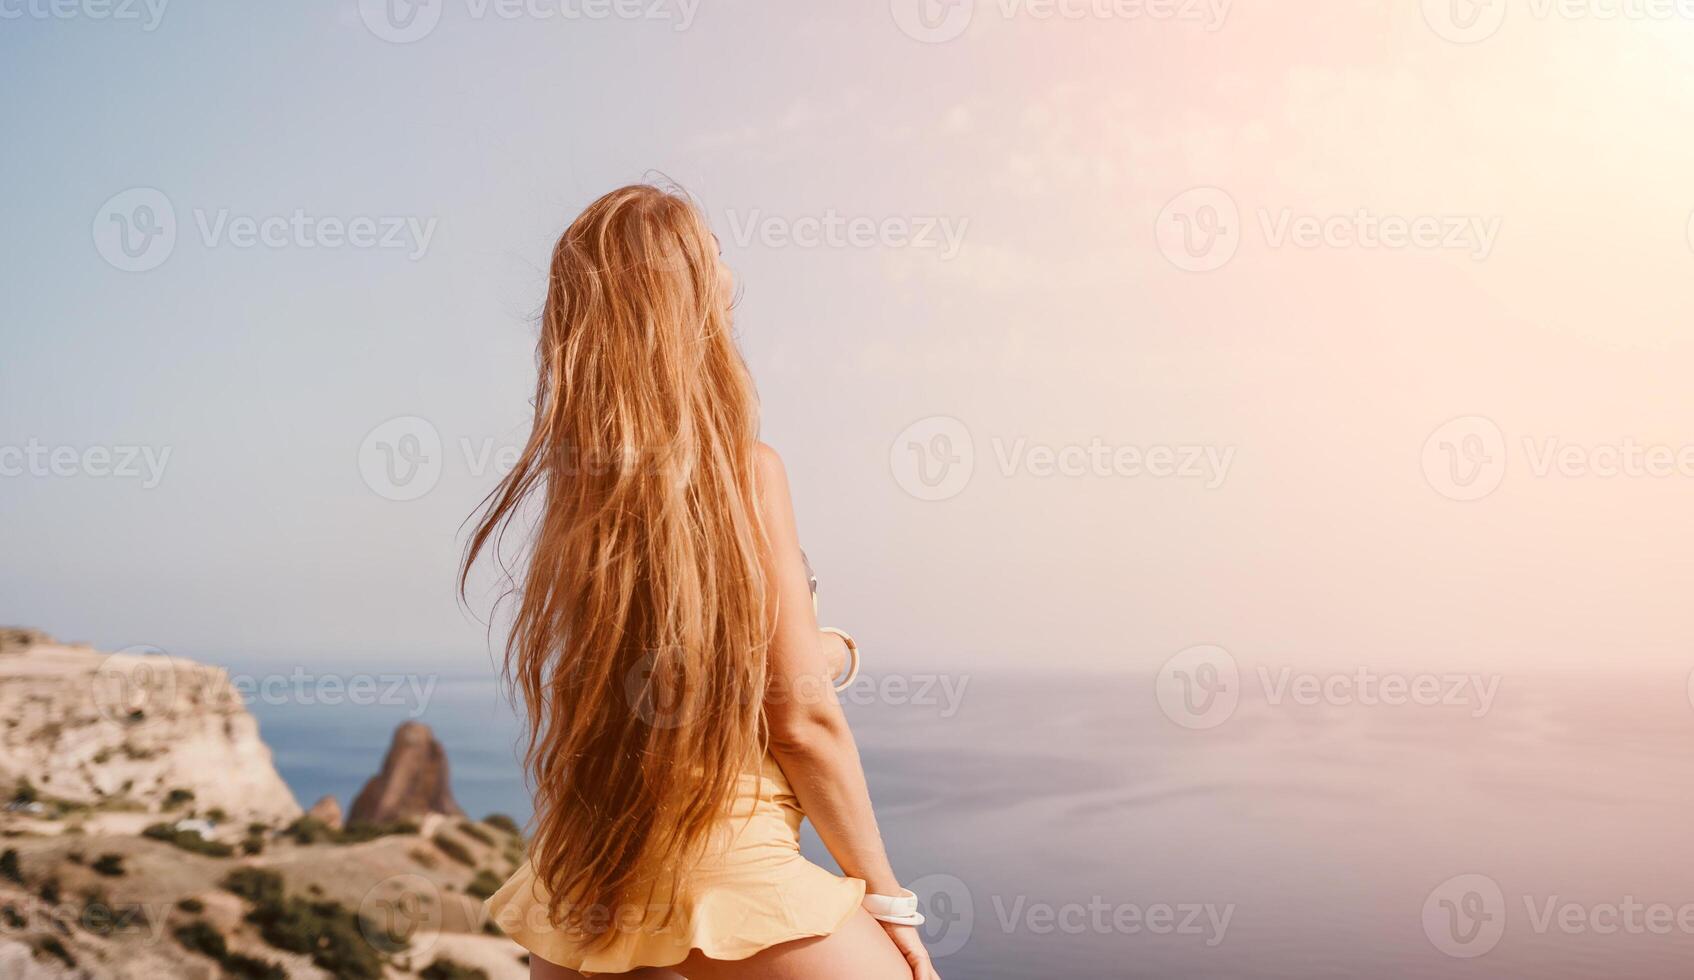 Woman travel sea. Happy tourist taking picture outdoors for memories. Woman traveler looks at the edge of the cliff on the sea bay of mountains, sharing travel adventure journey photo